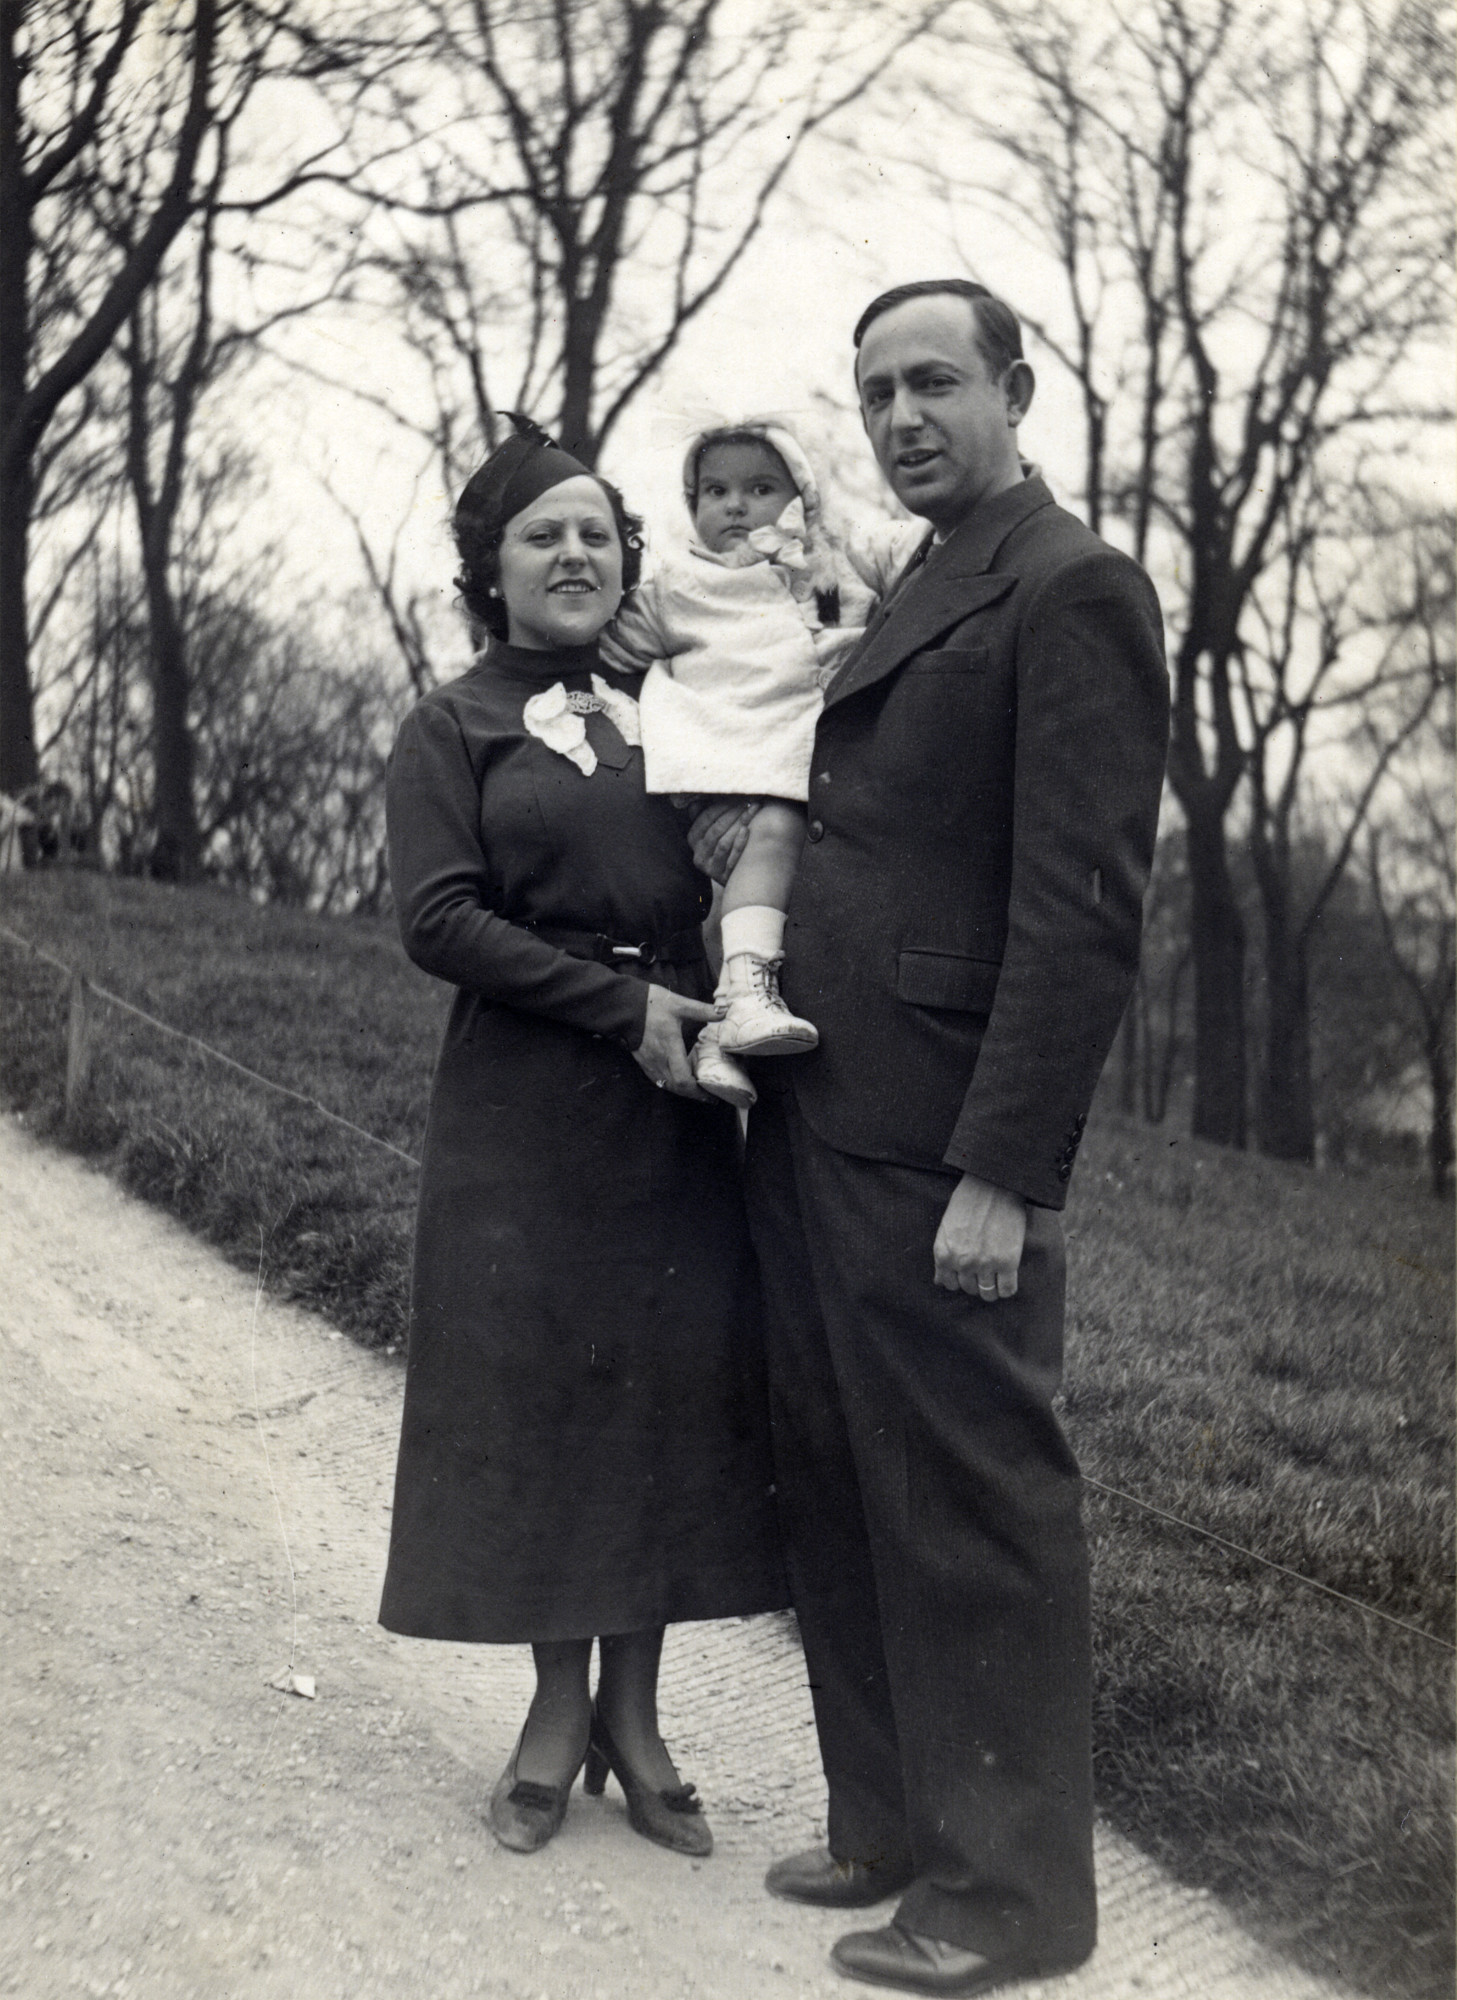 Ora with her parents, Etla and Yaakov in Metz, France.